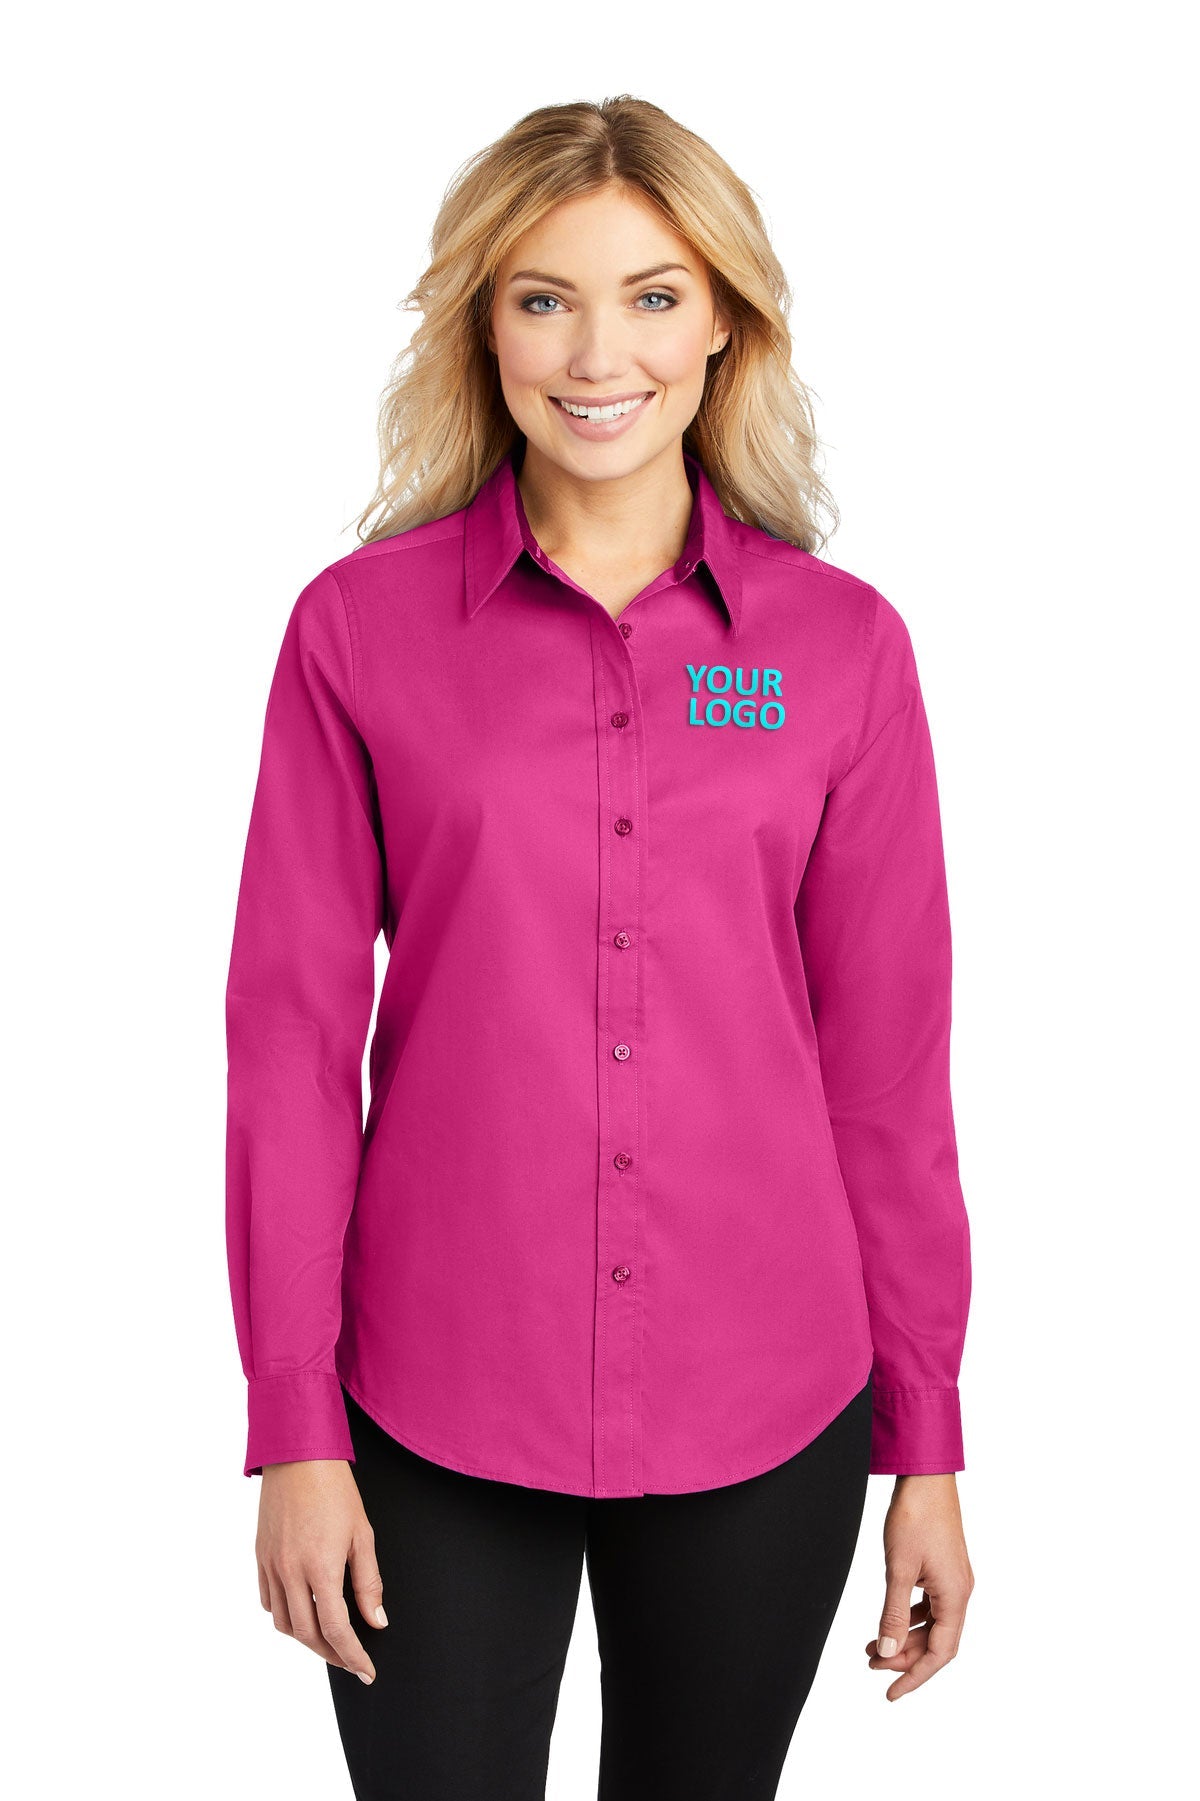 Port Authority Tropical Pink L608 custom embroidered shirts